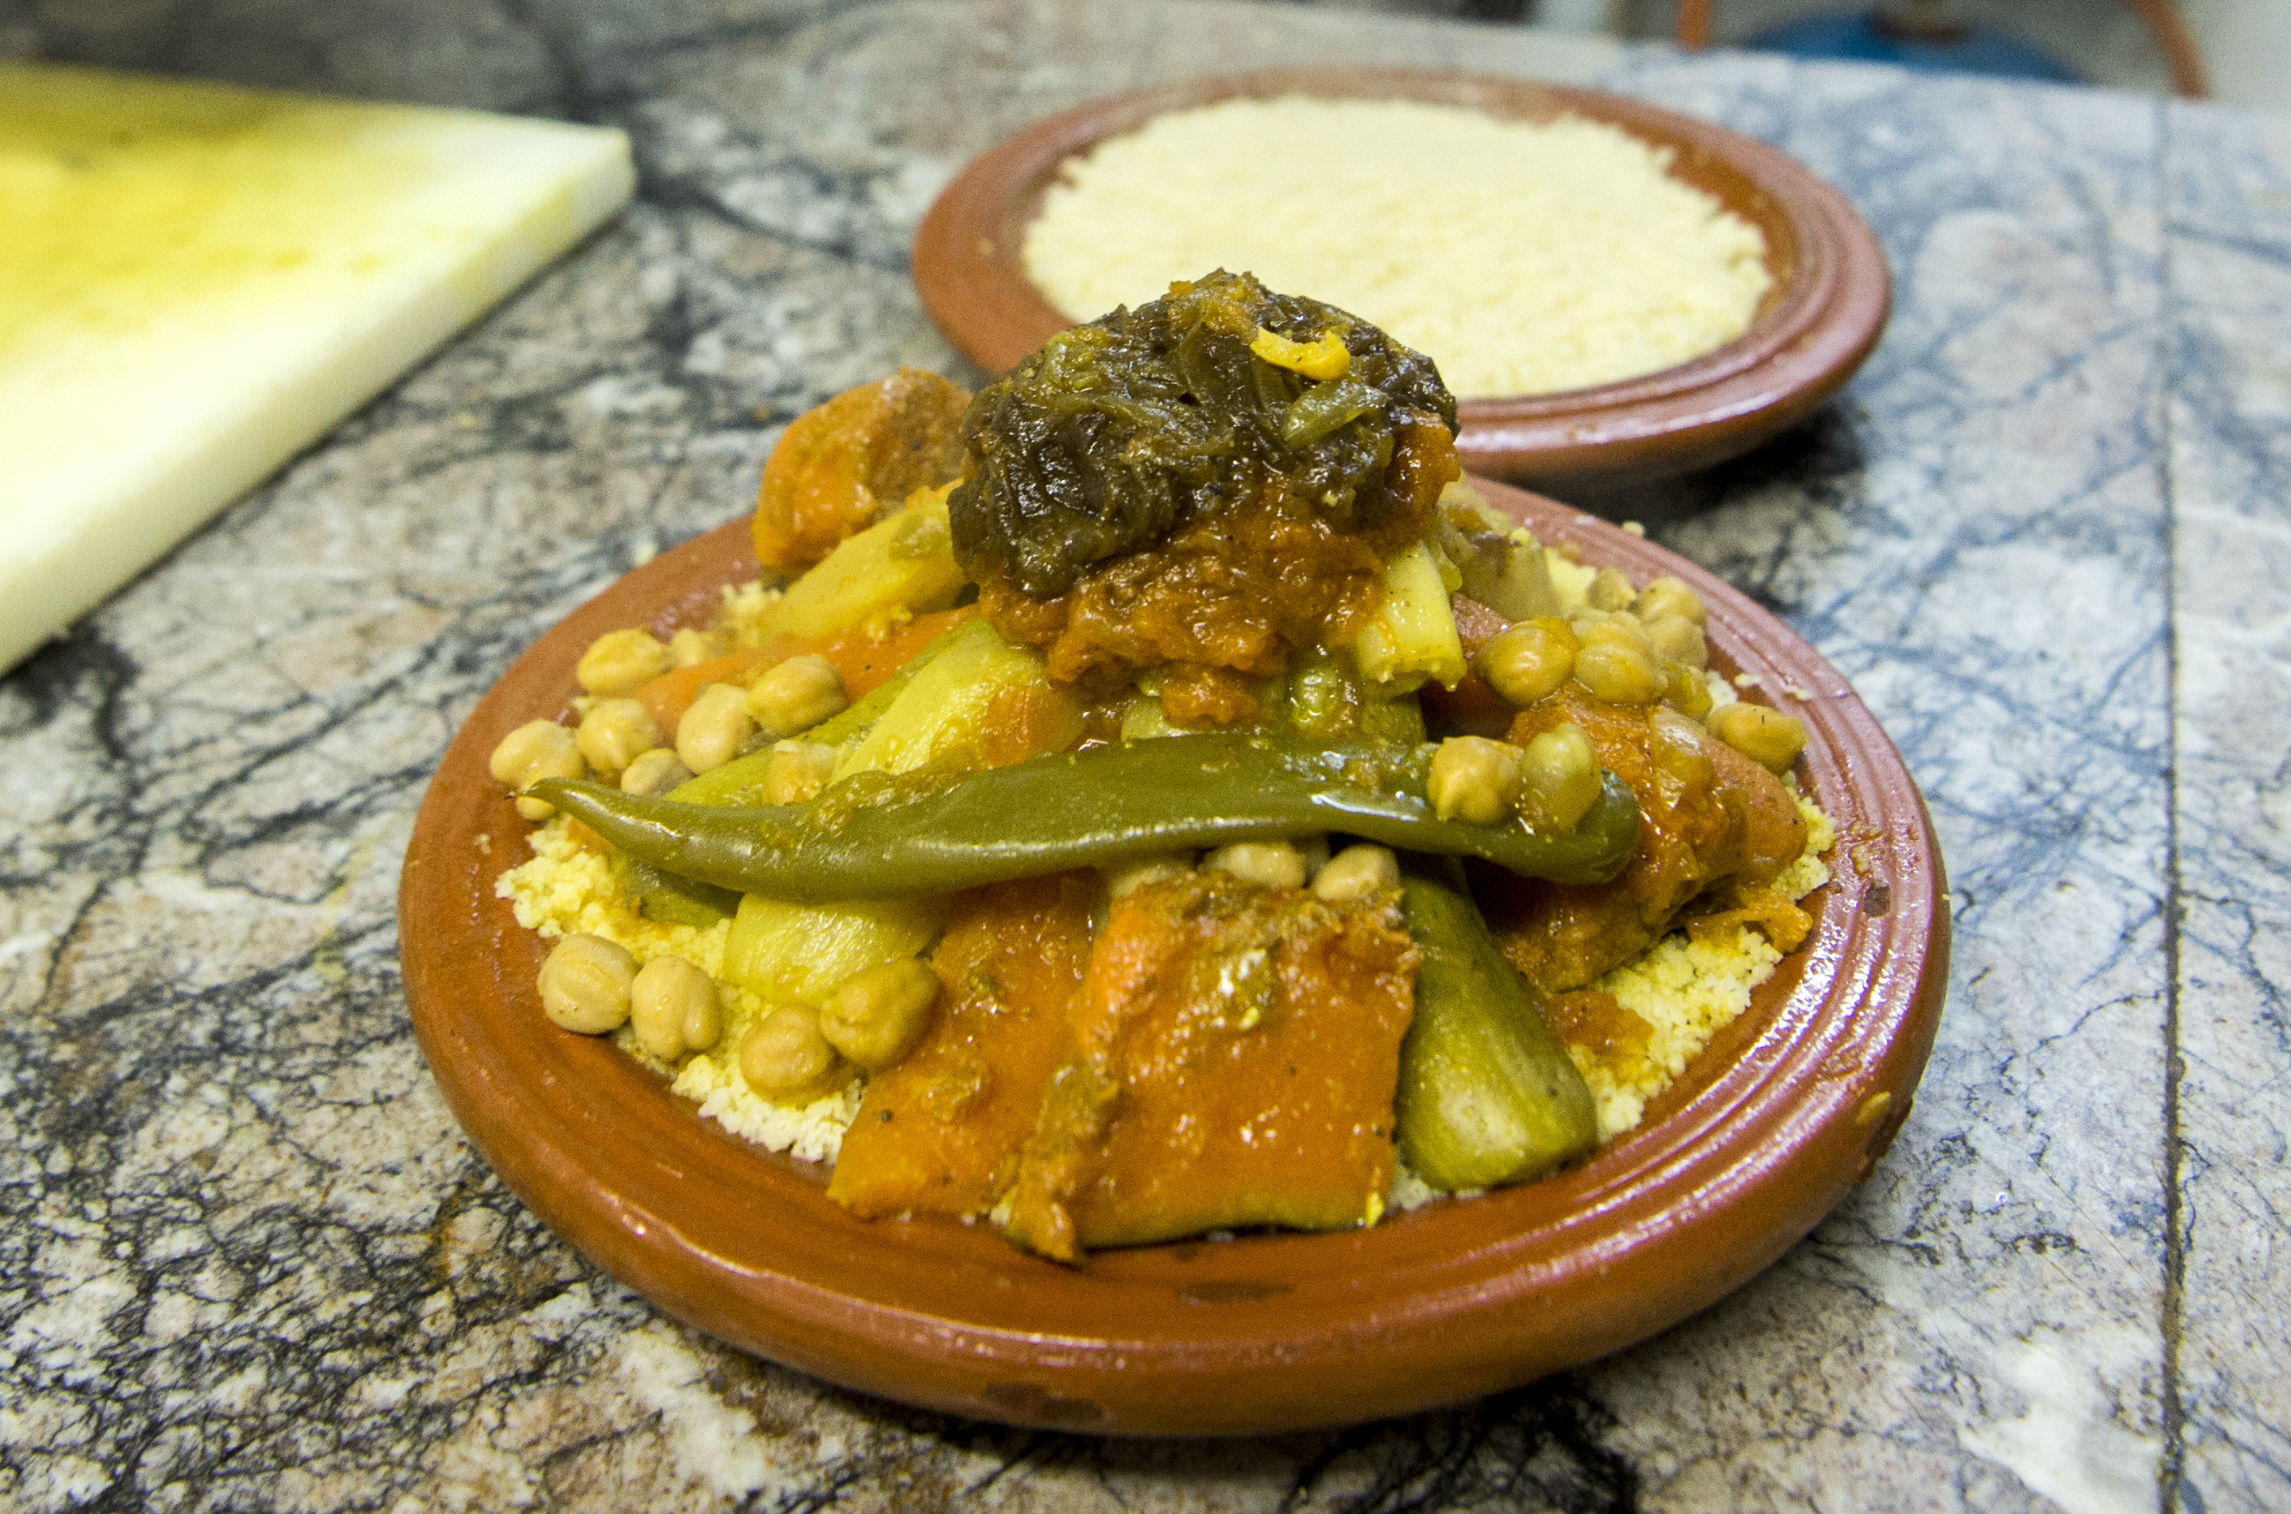 Couscous is prepared at a restaurant in Rabat in February 2018 (AFP)